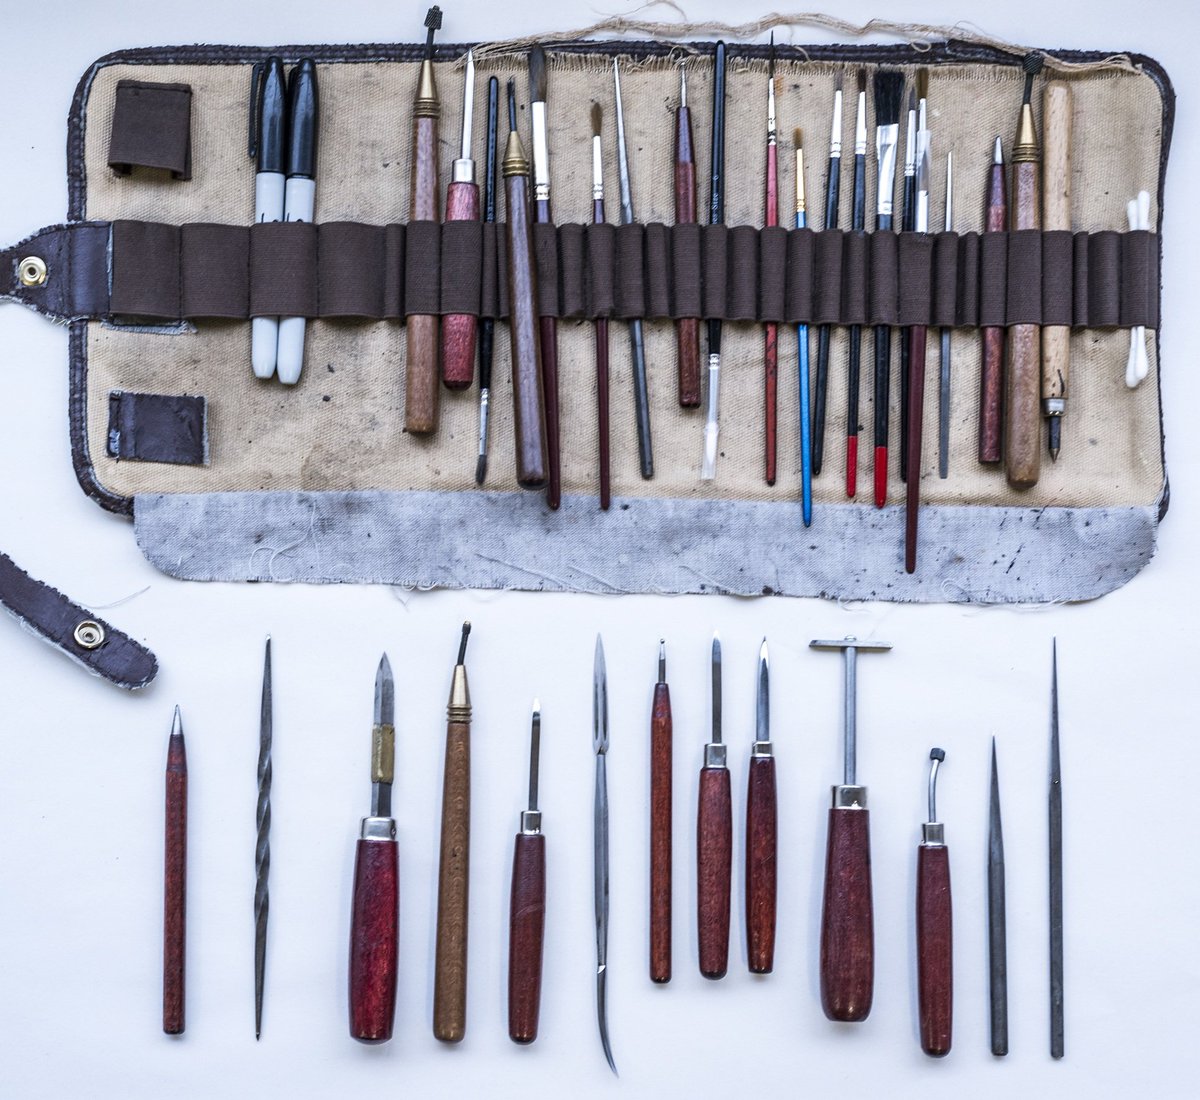 'Tools of the trade' 

A collection that has grown over the years,each tool offering a variation of mark. 

I am officially Proposing a National tool day for the UK.

Who's with me?

Photography @johounsomephoto
#artiststudio #artiststools #printtools #printmakingtools #handmade